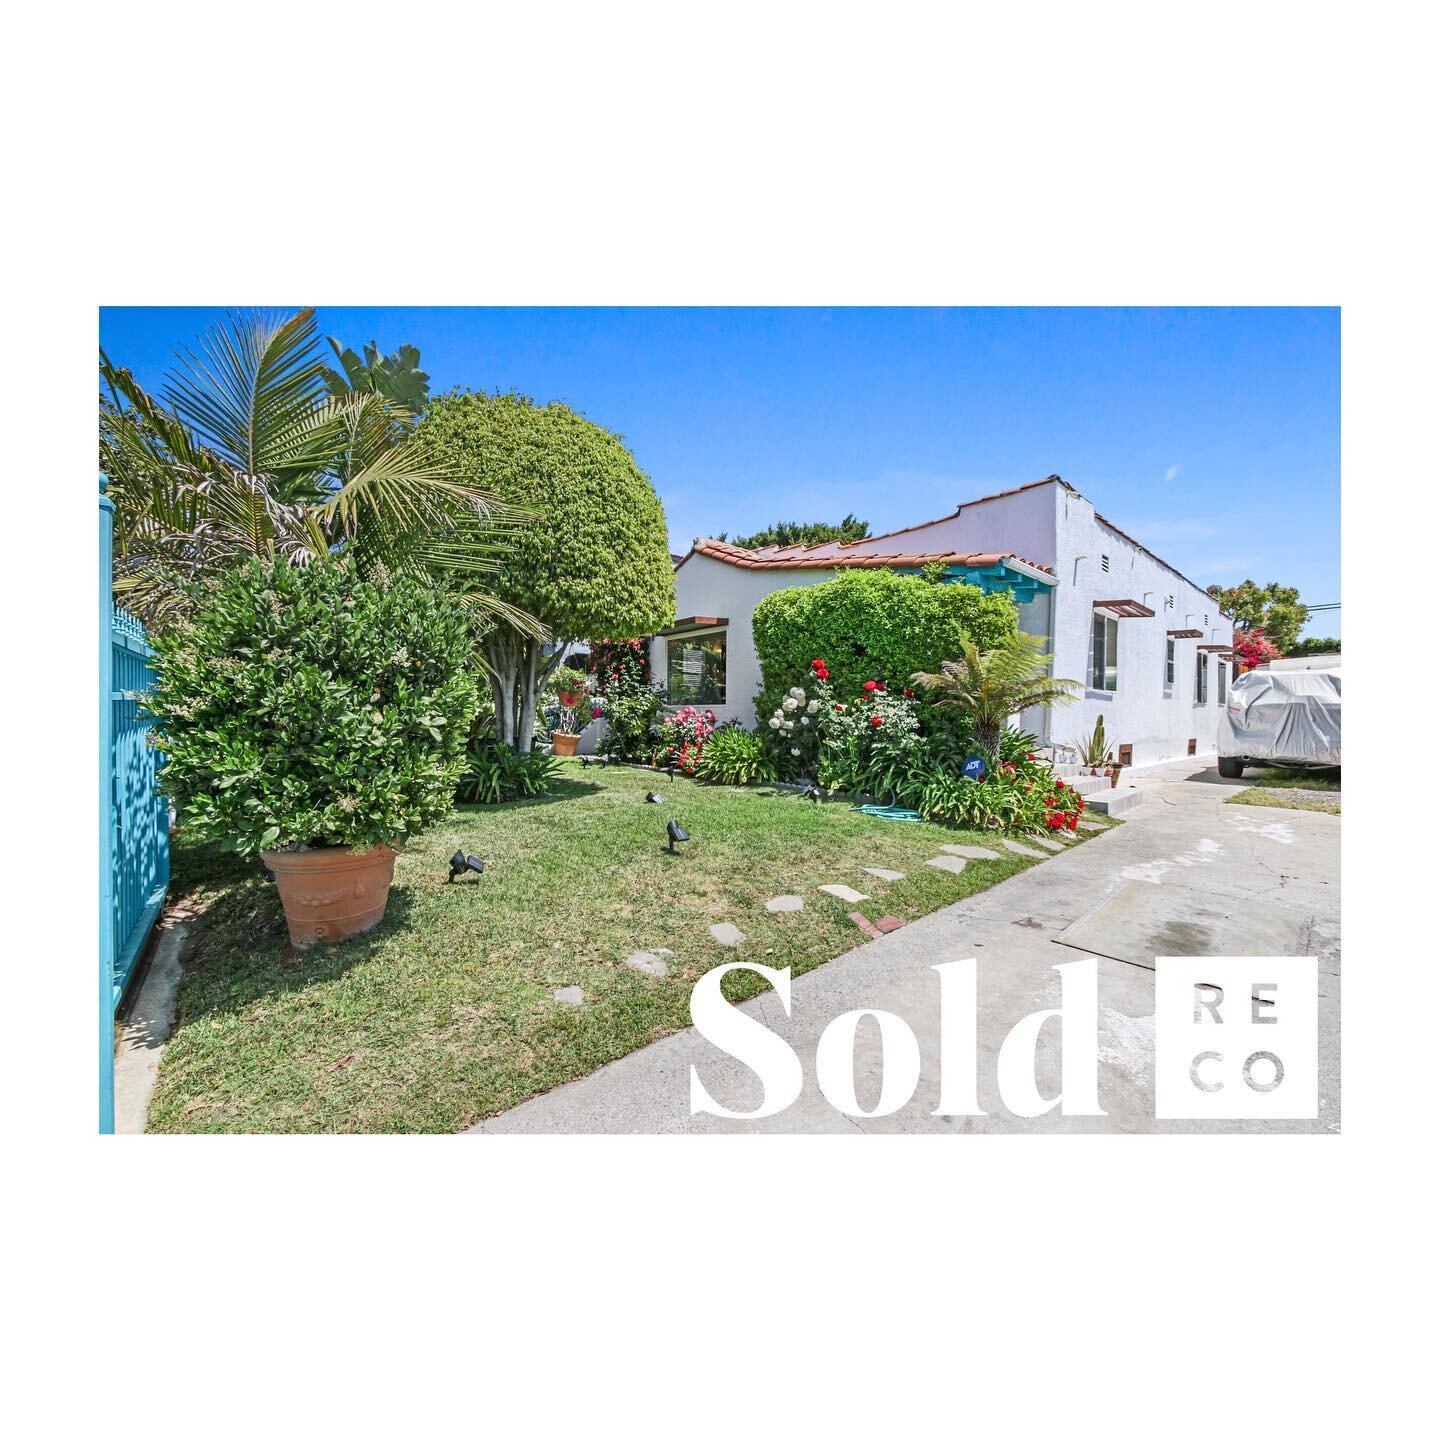 🎉Congrats! 🎉 To a very sweet family that is on to their next adventure! #justsold 

And thanks @v.mccoy.here for making escrow so much fun!

#realestatecollective #larealestate #RealtorsServingTheCommunity #letsgetyouhome #losangelesrealestate  #re